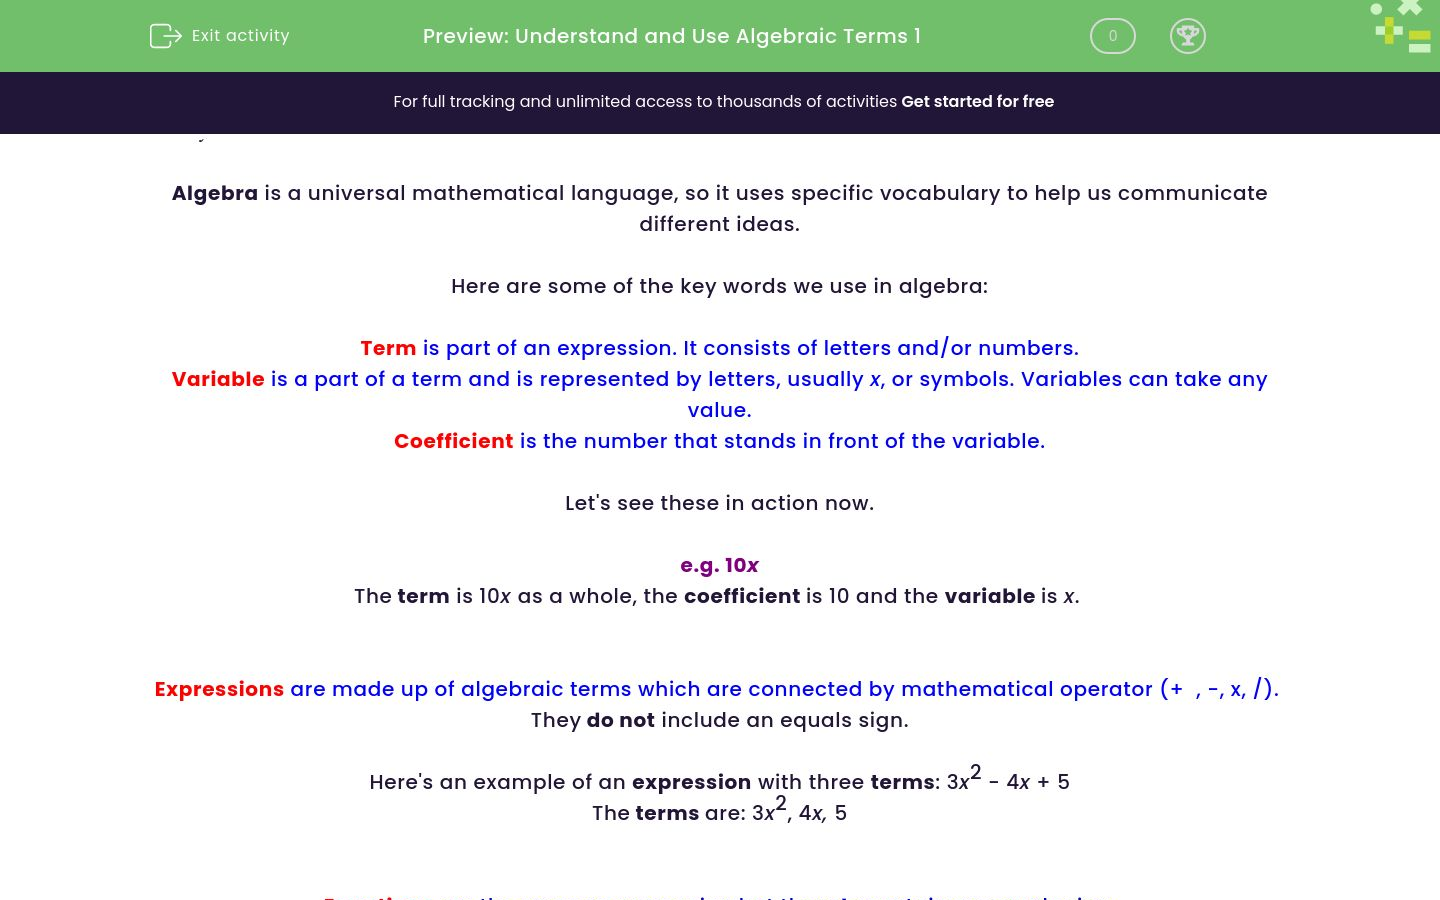 Understand and Use Algebraic Terms 1 Worksheet - EdPlace